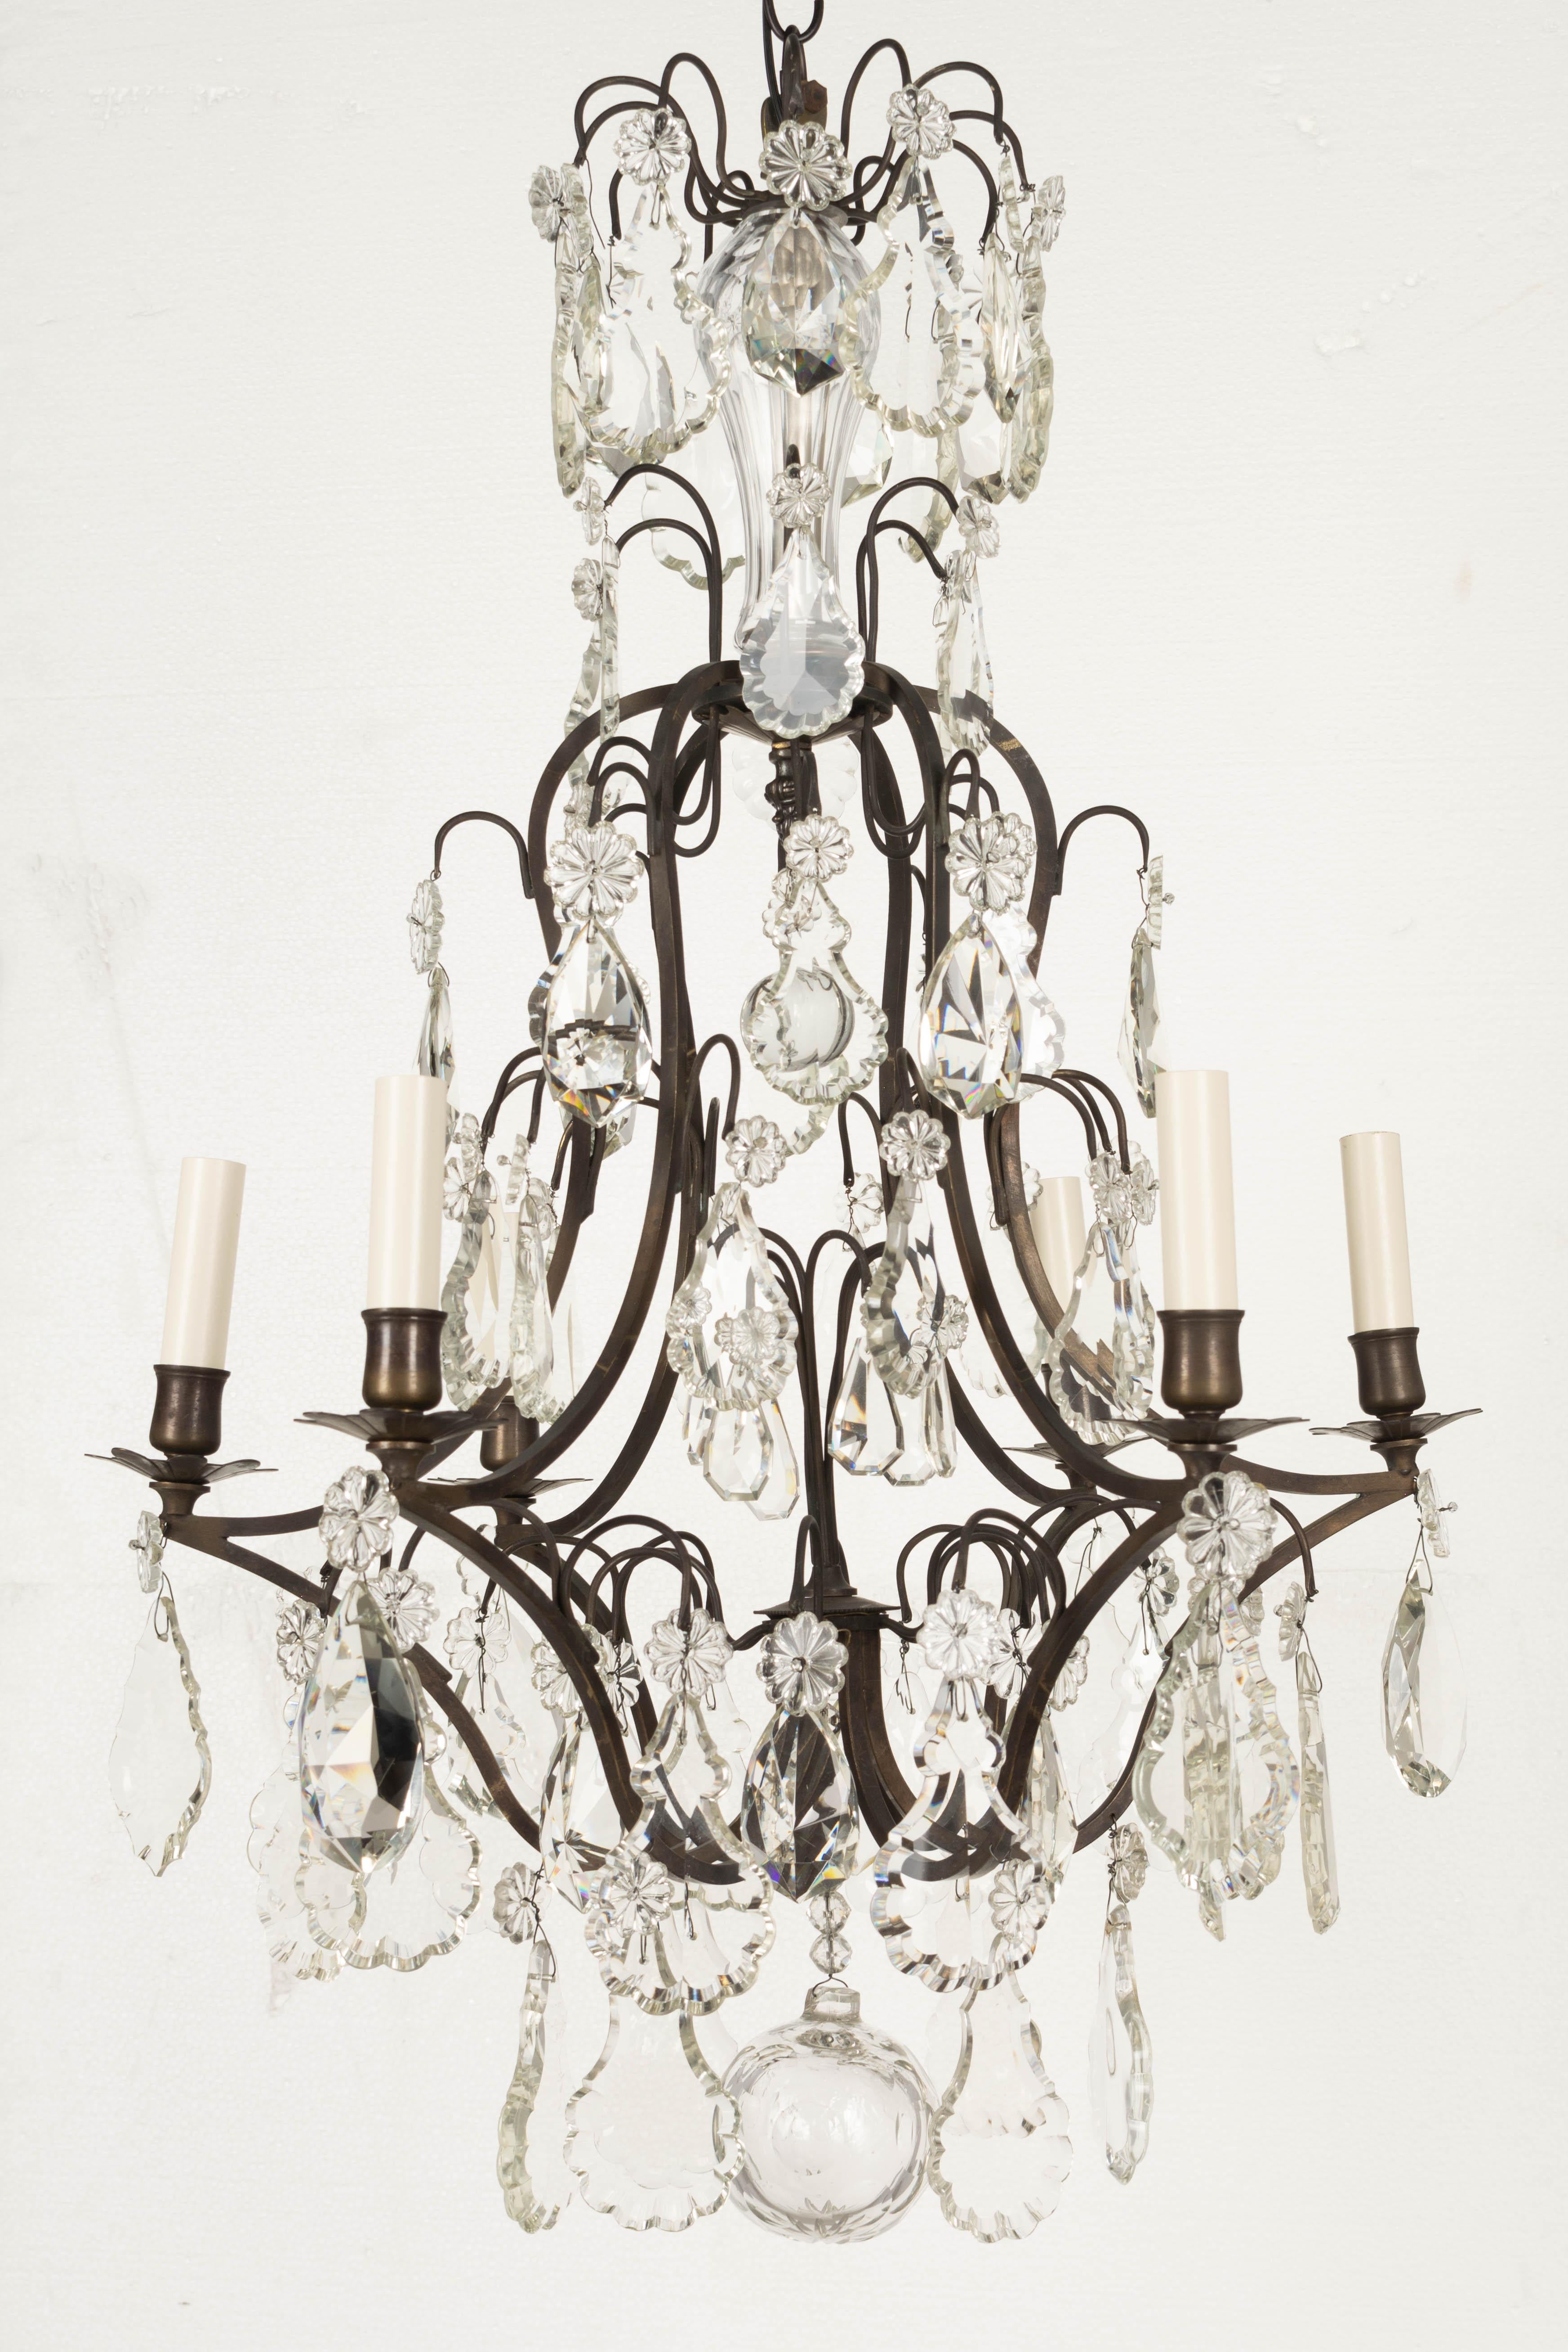 A Louis XV style six-light chandelier with an assortment of crystals with rosettes, including French pendalogues and large faceted prisms, a ribbed column at the top, and cut crystal ball. Brass frame with dark bronze patina. Rewired with new